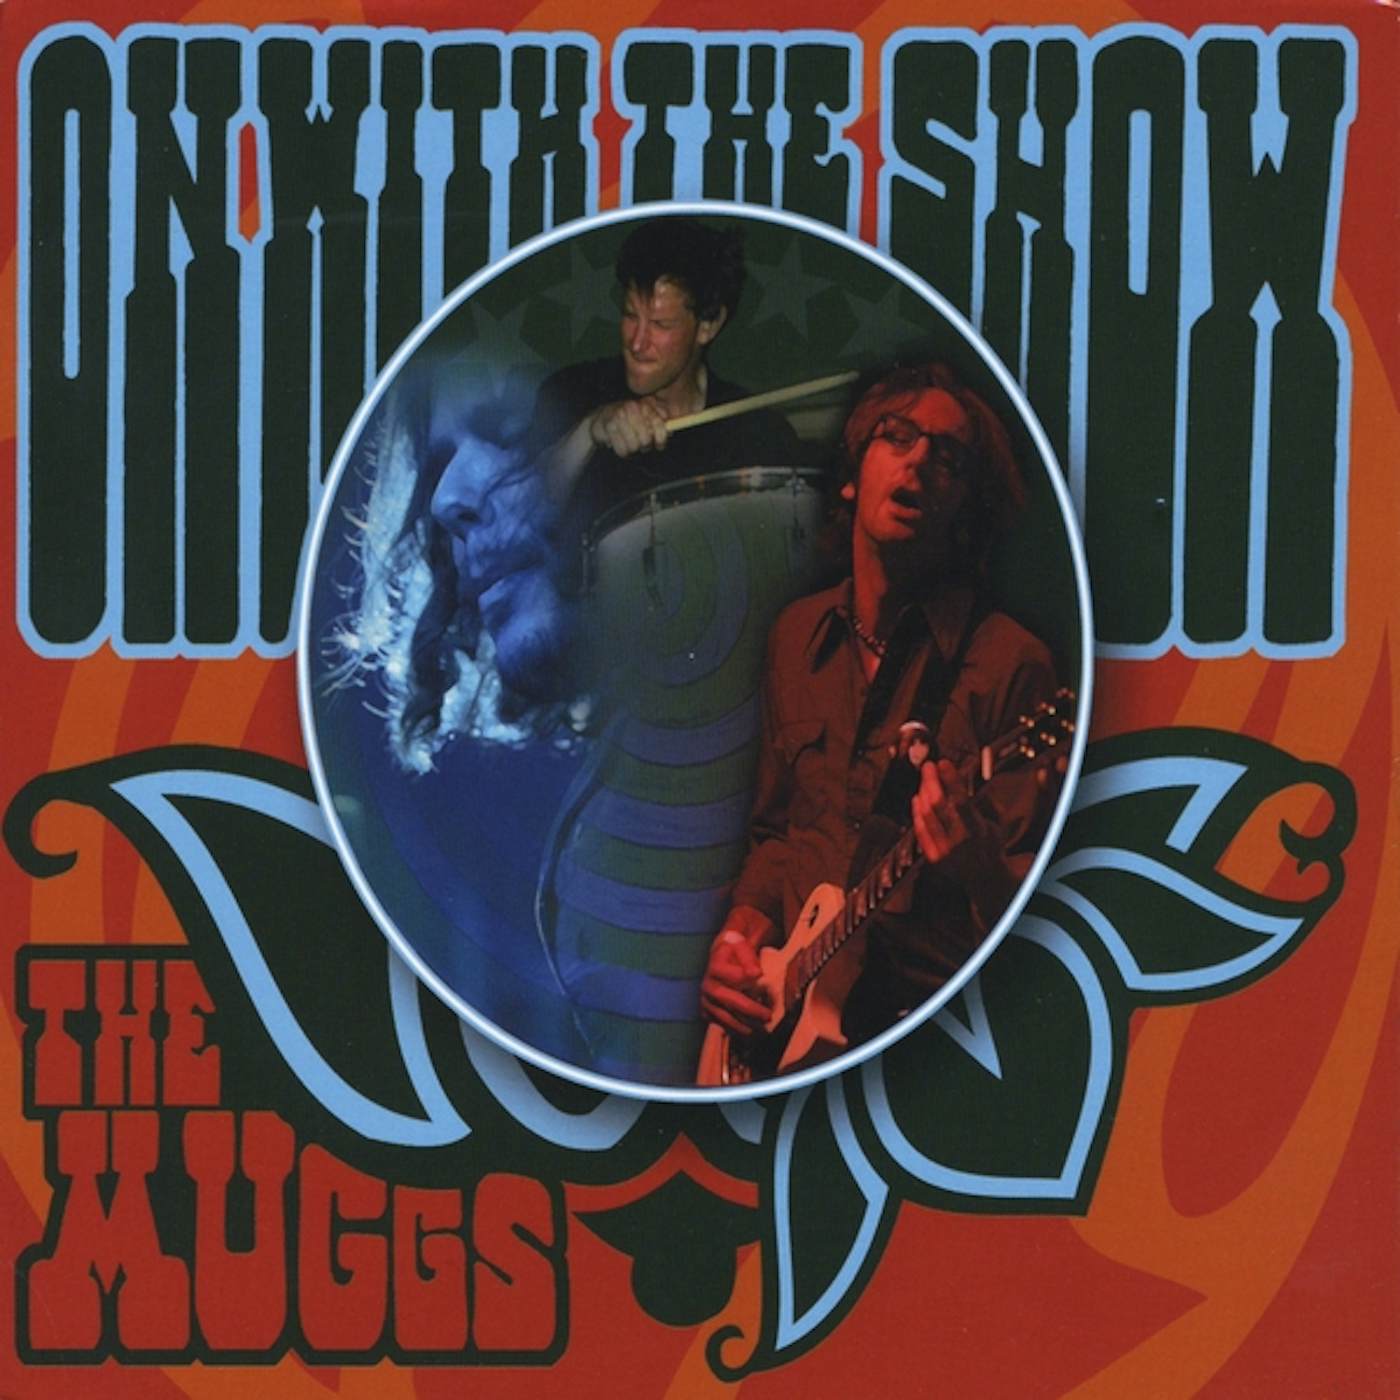 The Muggs ON WITH THE SHOW CD